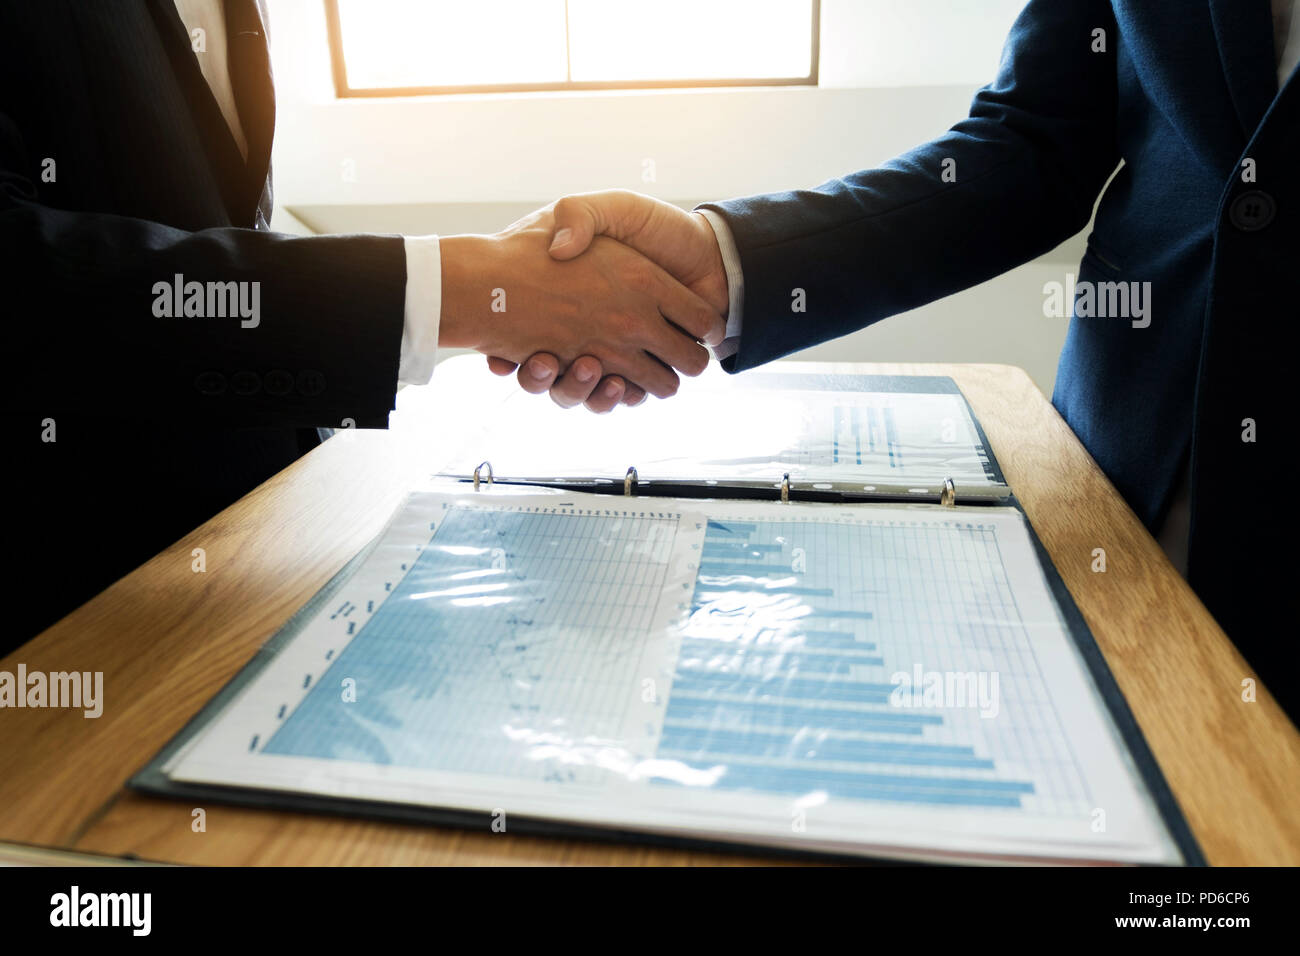 Business handshake. Business people shaking hands, finishing up a meeting,Success agreement negotiation. Stock Photo